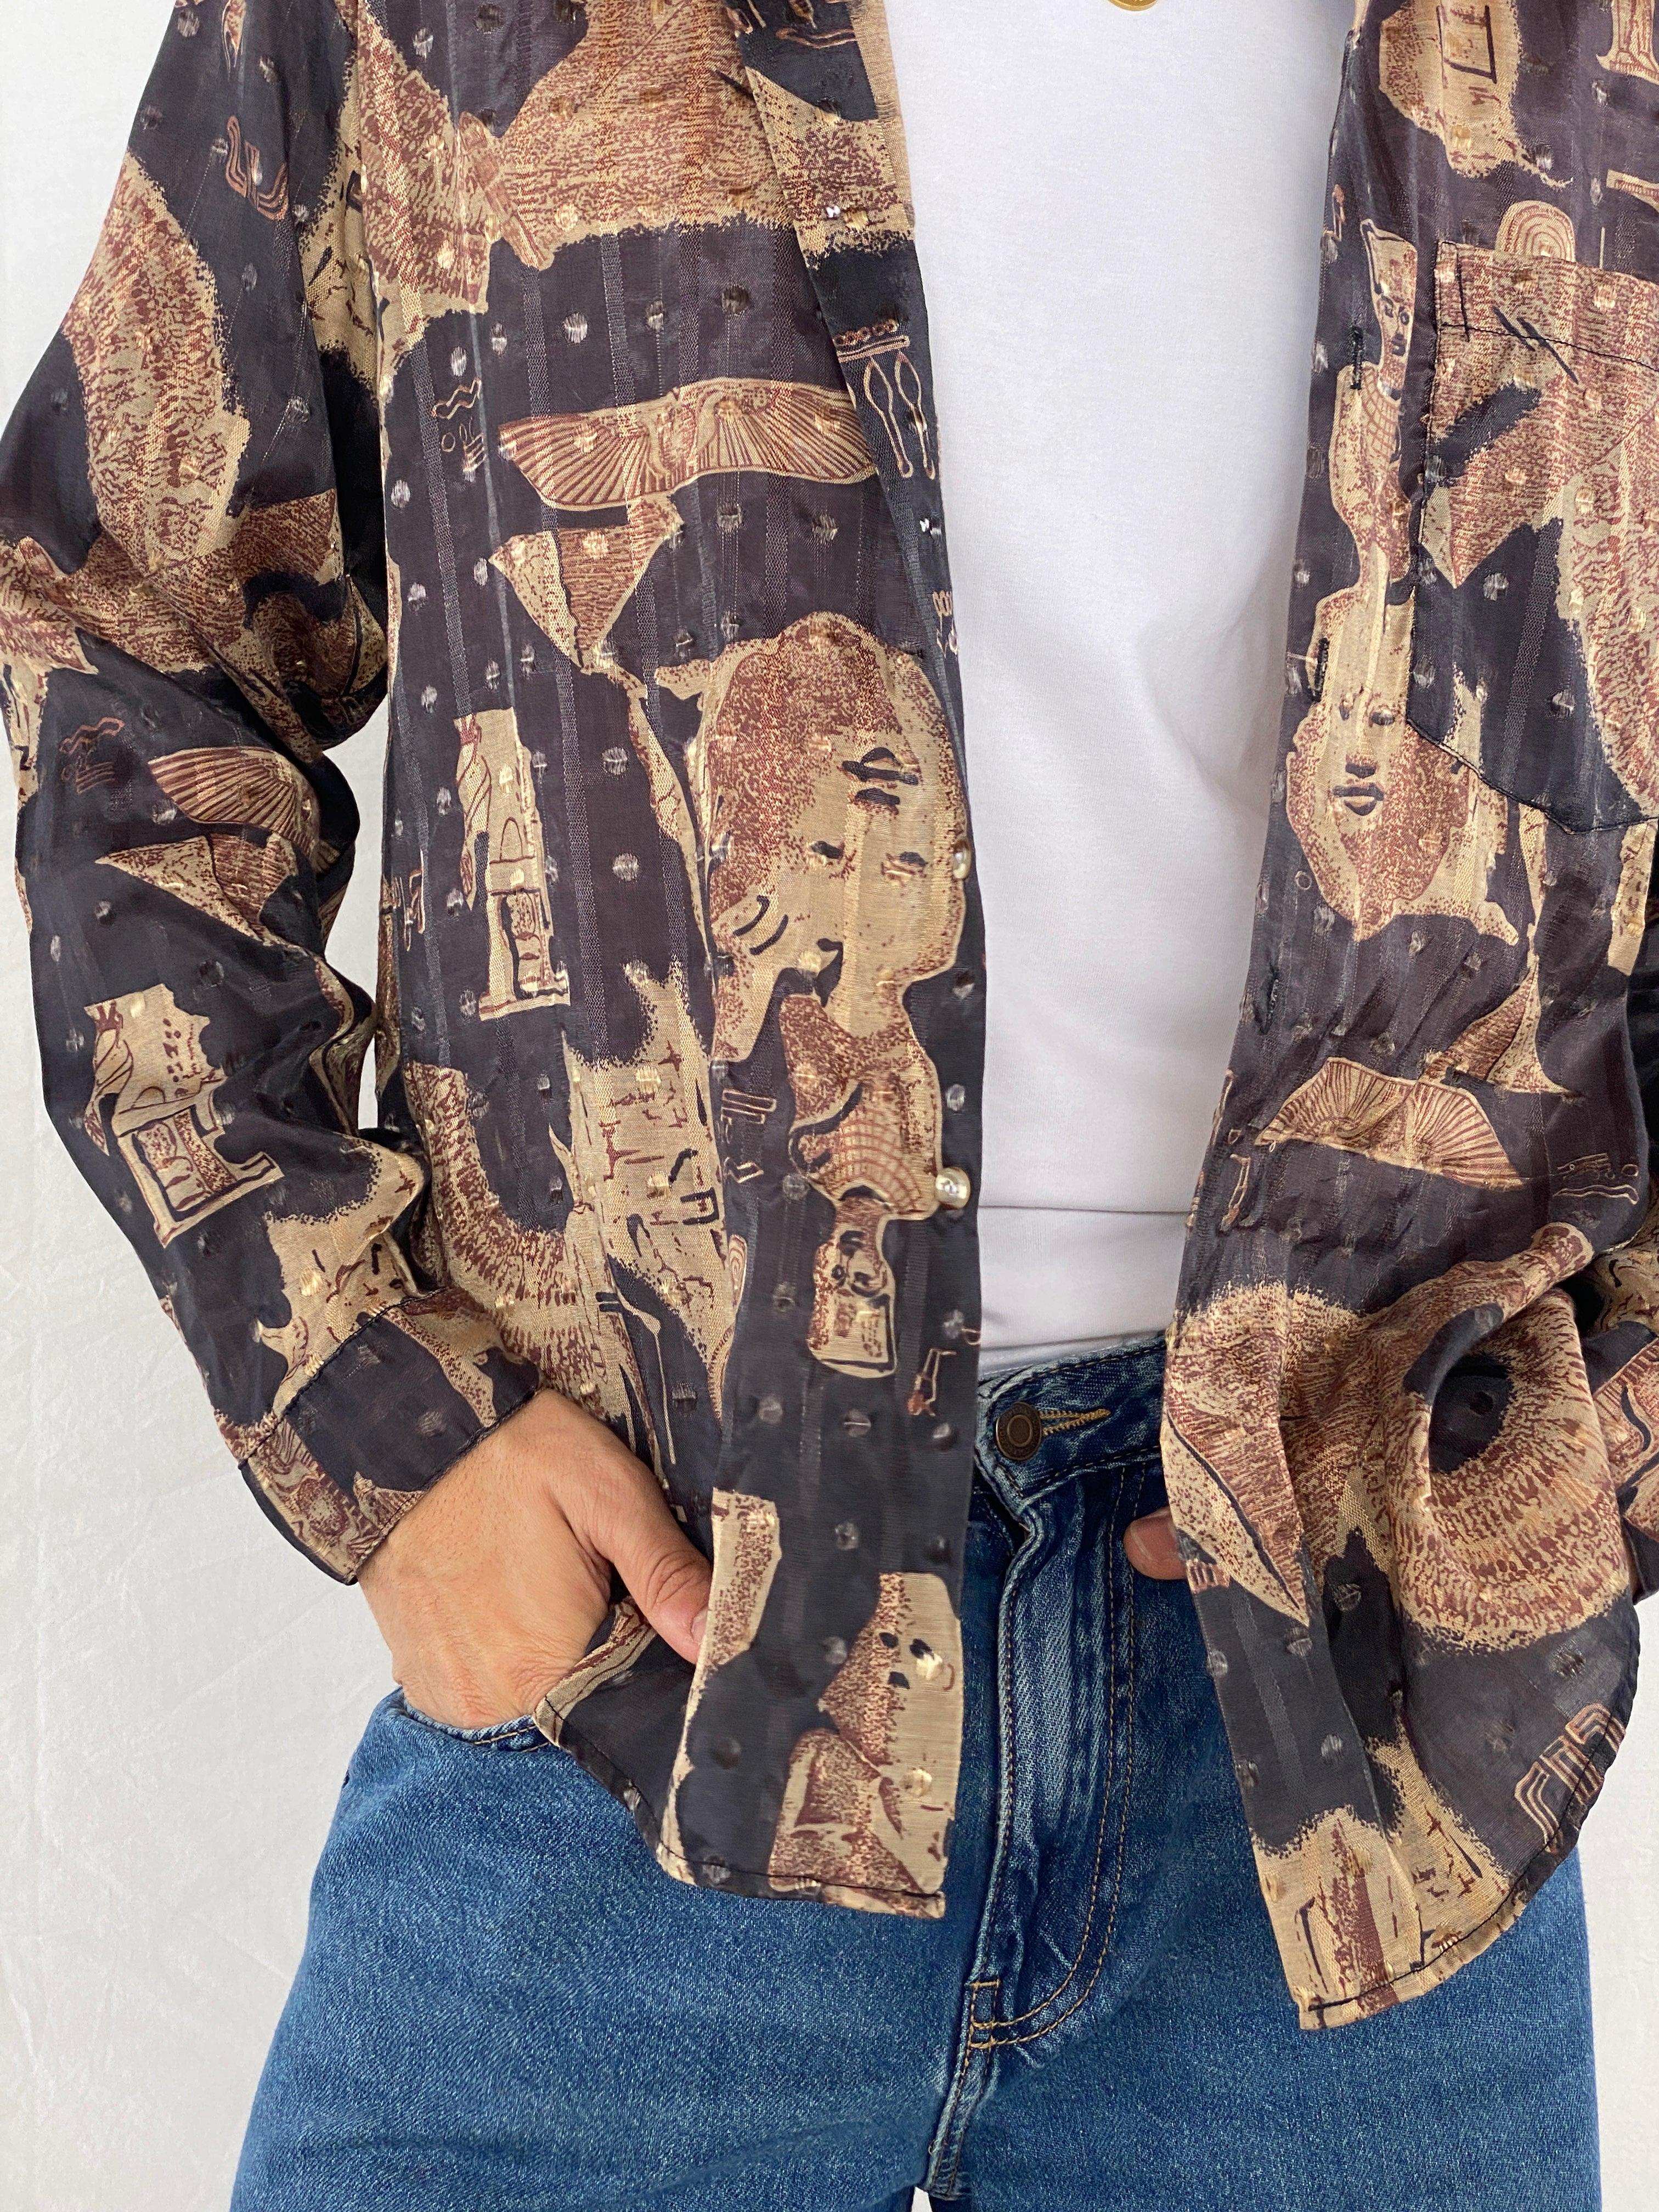 Vintage Thai Silk Collection Printed Full-Sleeve Shirt - Balagan Vintage Full Sleeve Shirt 90s, Abdullah, full sleeve shirt, NEW IN